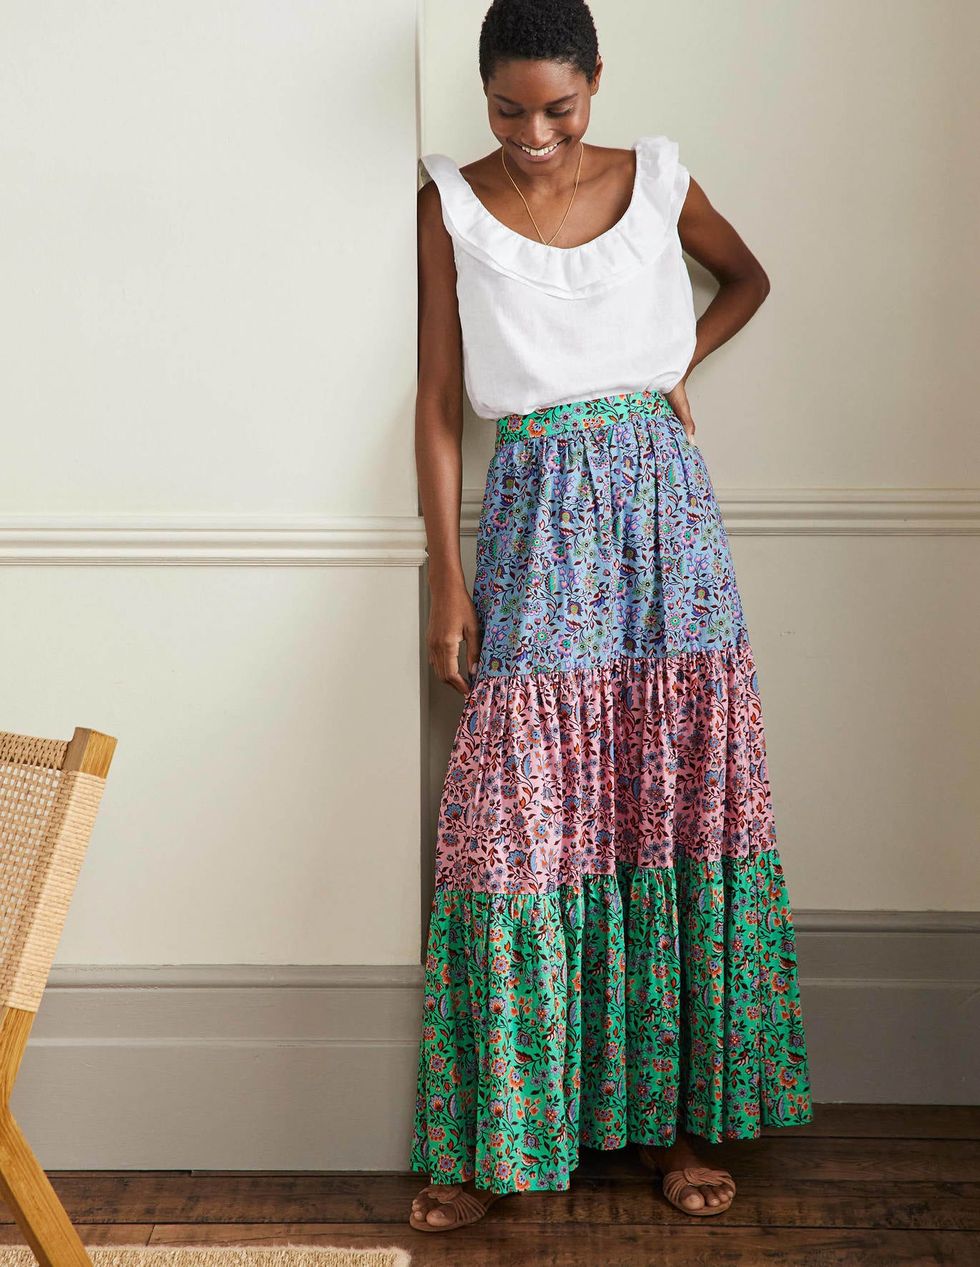 Boden is selling the summer co-ord of dreams